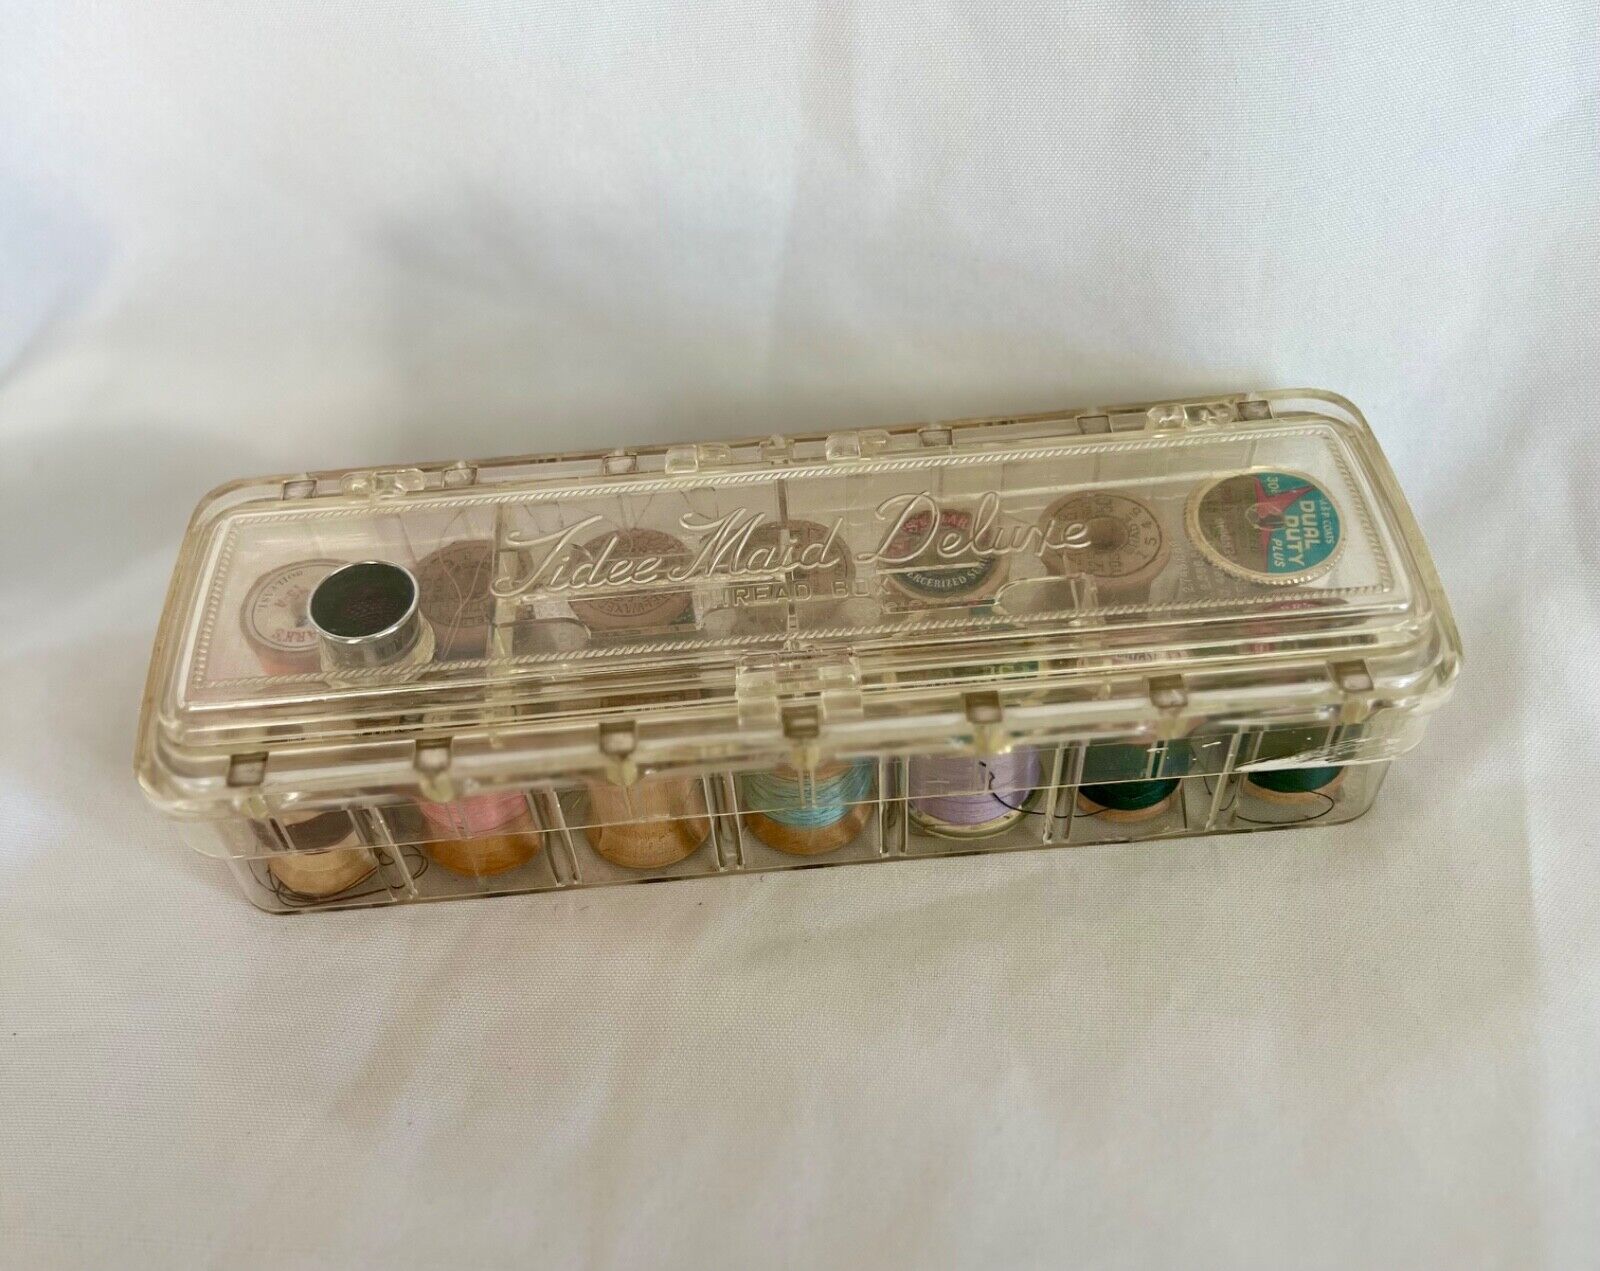 Vintage c1950’s Tidee Maid Deluxe Plastic Thread Box / sewing Container W Thread